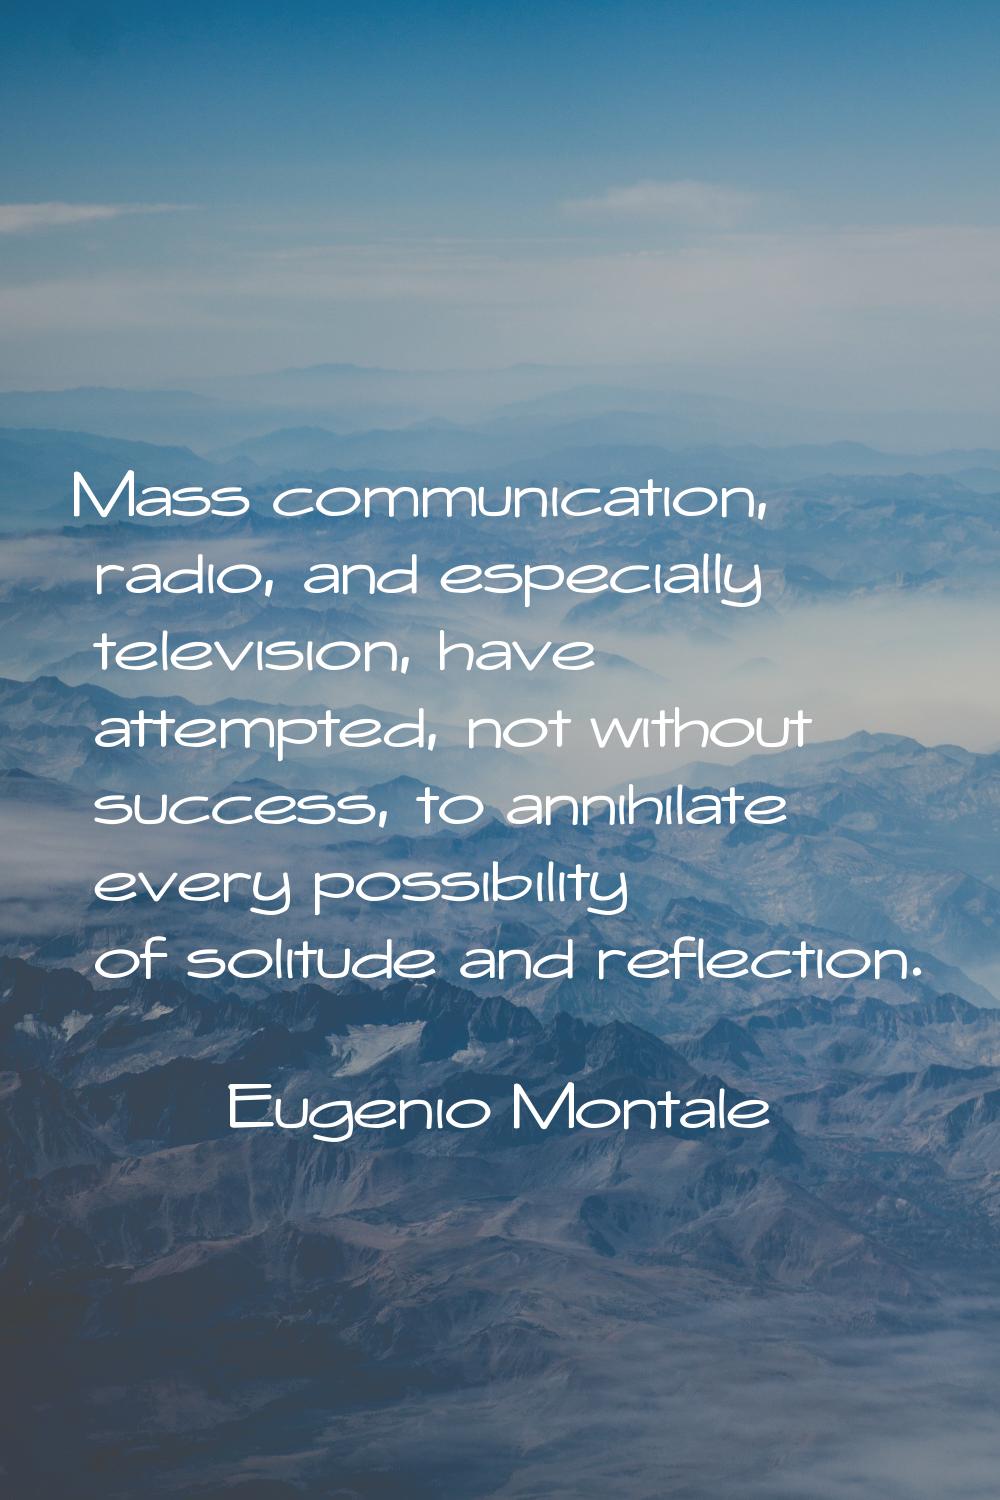 Mass communication, radio, and especially television, have attempted, not without success, to annih